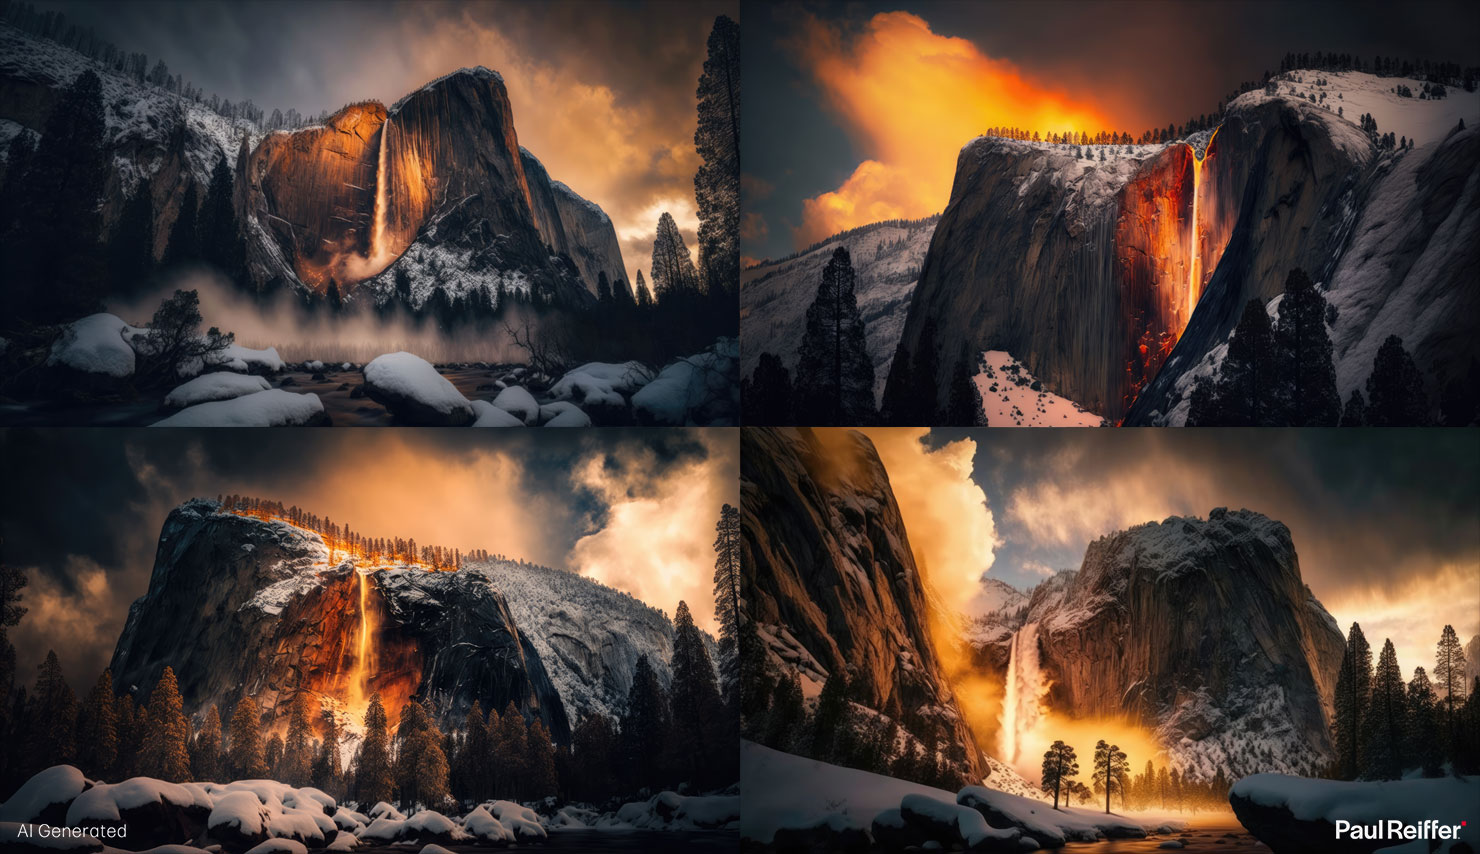 Firefall Yosemite Fantasy Examples Options Sunset Fire Fall Midjourney Imagine Split Photographers Landscape How To Use AI Images Good Bad Review Bing ChatGPT Guide Paul Reiffer